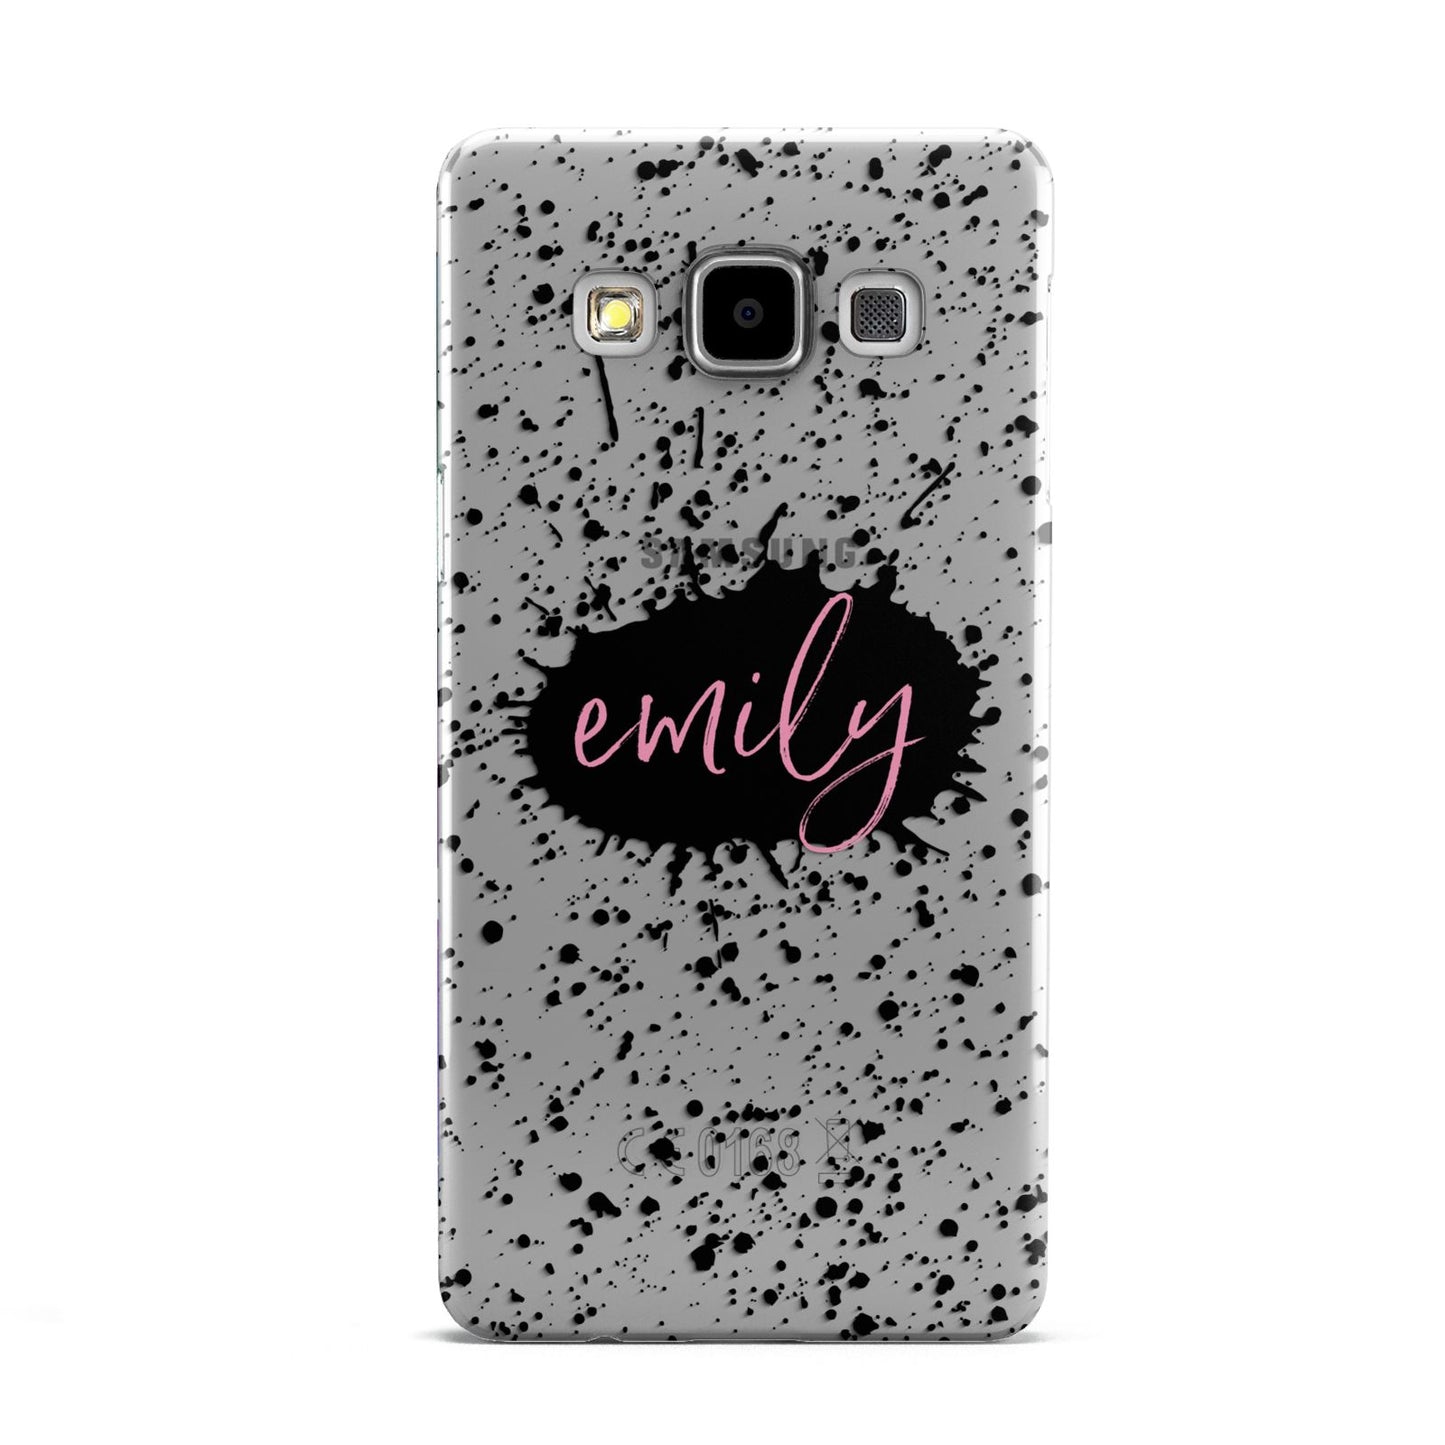 Personalised Black Ink Splat Clear Name Samsung Galaxy A5 Case